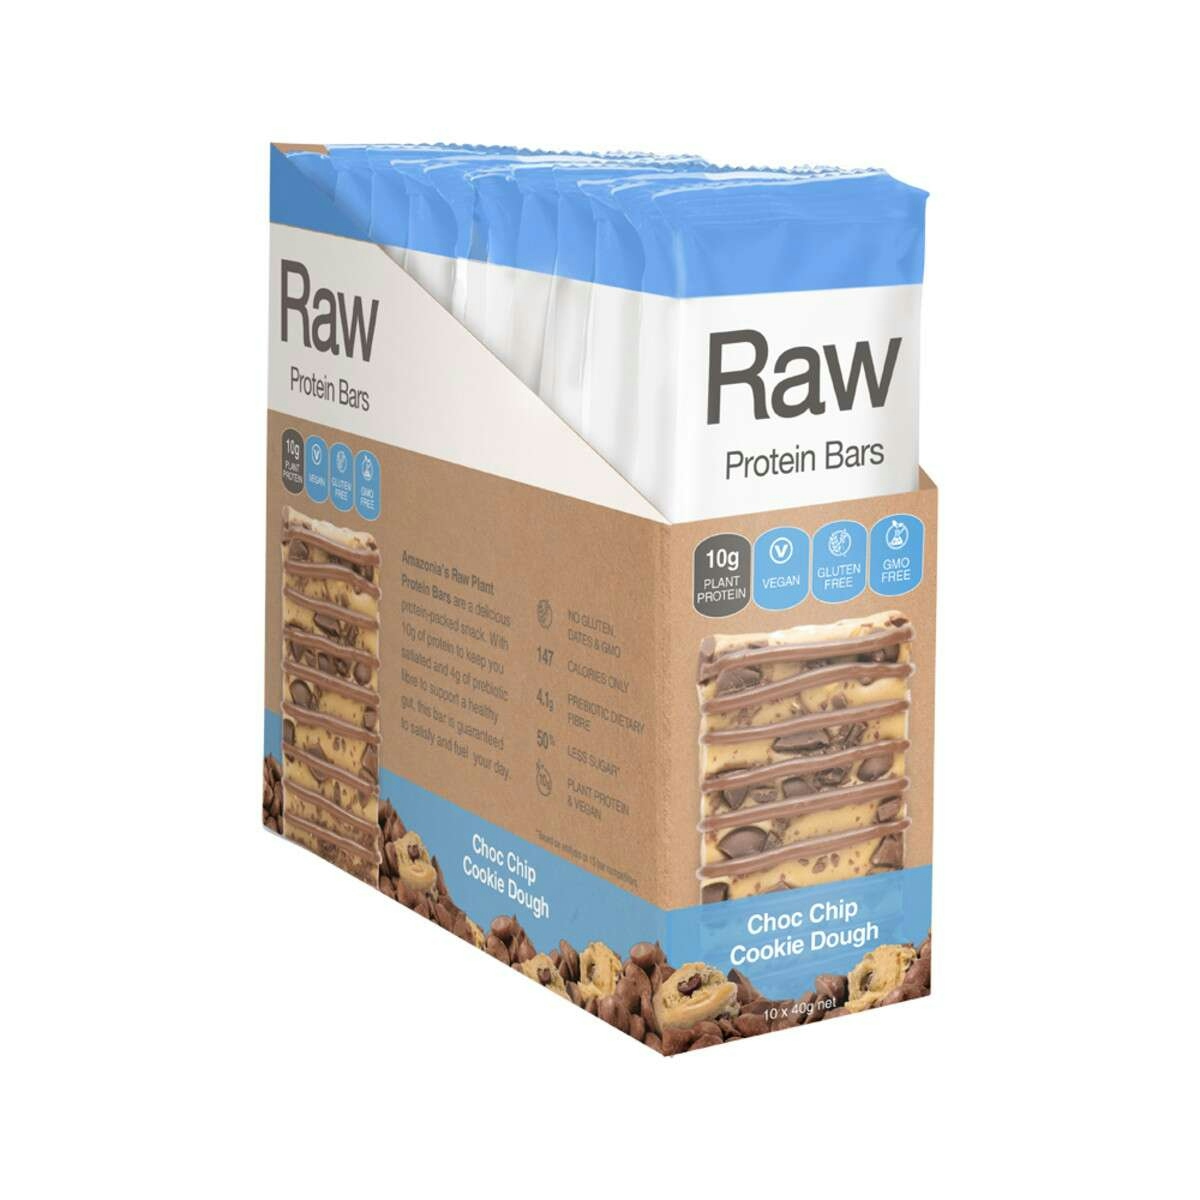 image of Amazonia Raw Protein Bar Choc Chip Cookie Dough 40g x 10 Display on white background